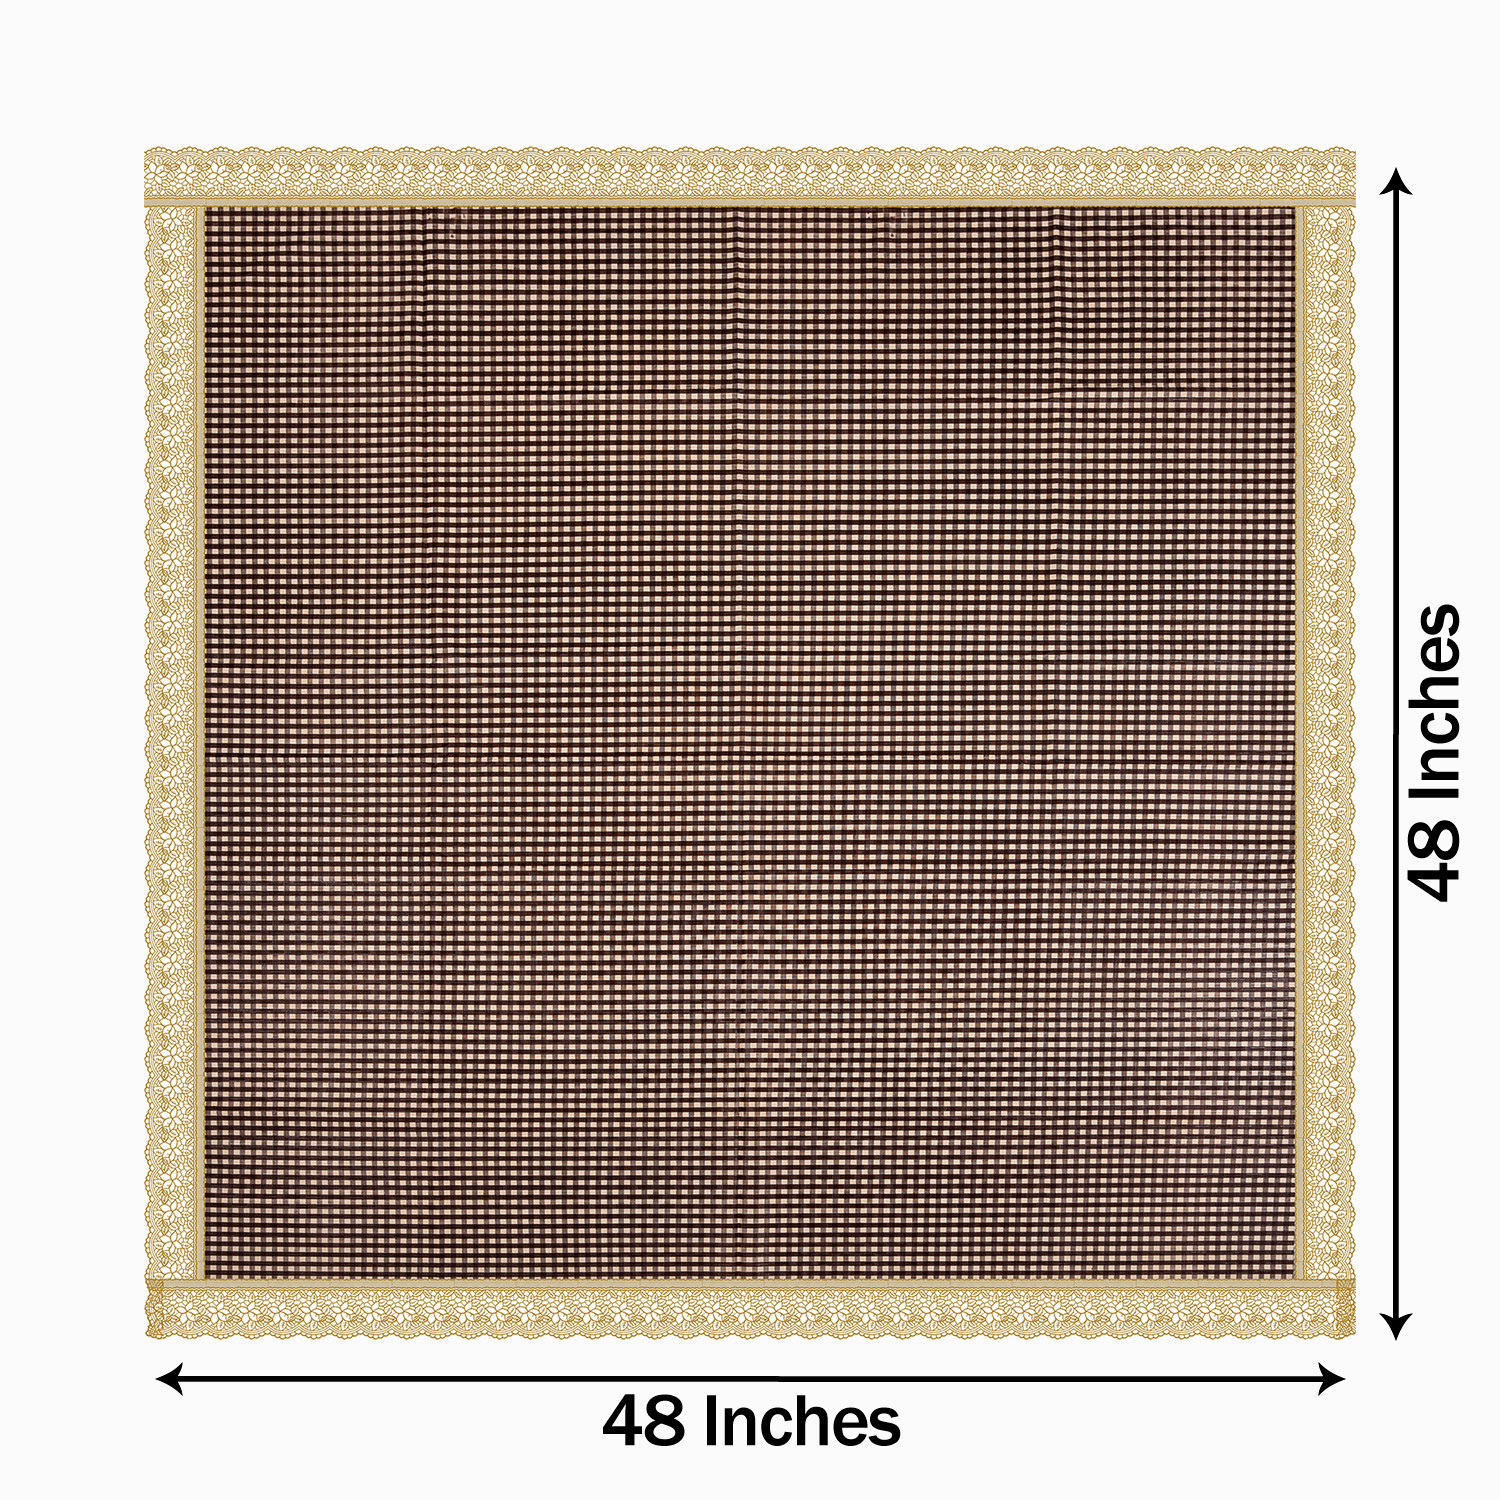 Kuber Industries Square Table Cover for 4 Seater|PVC Waterproof Check Pattern Tablecloth Indoor & Outdoor|48x48 Inch (Brown)